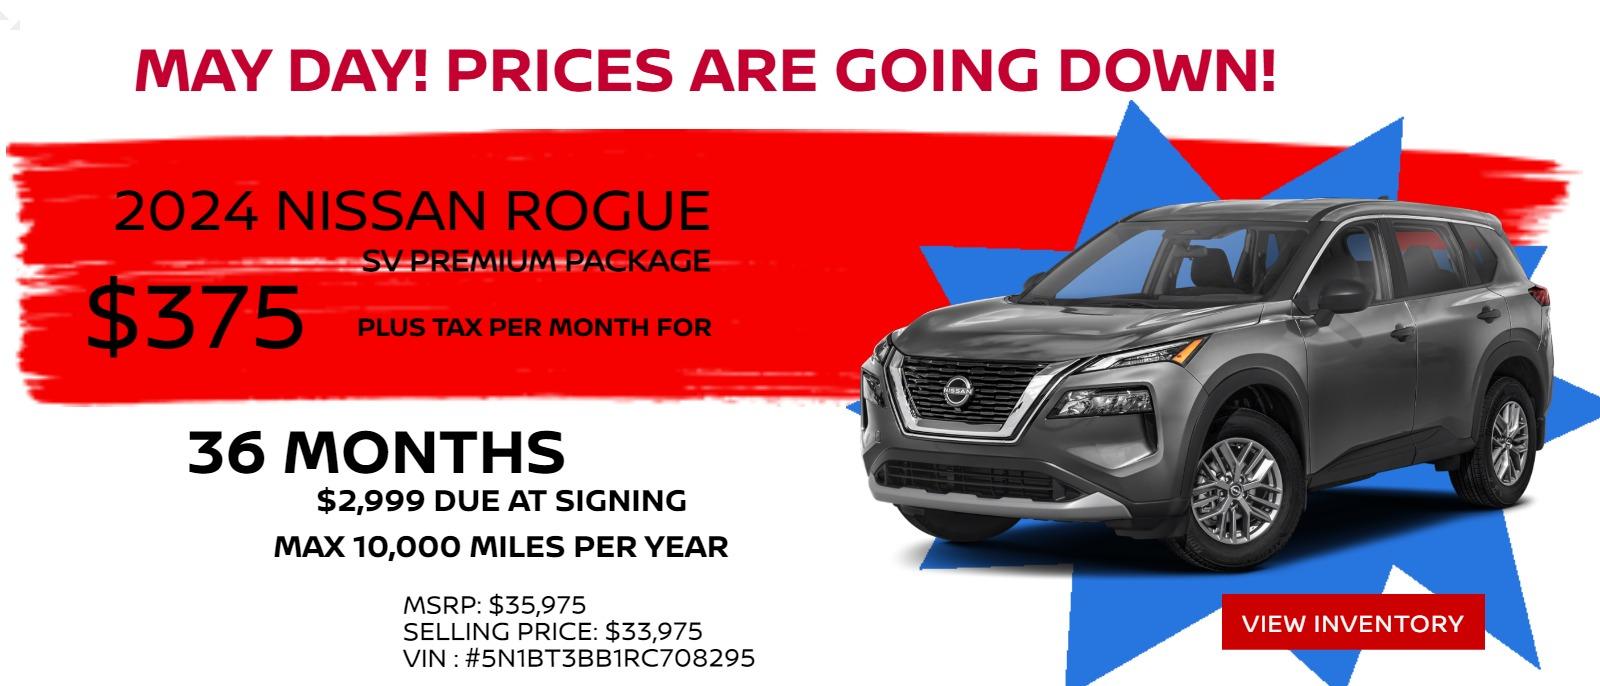 2024 NISSAN ROGUE S
MSRP: $38,610
VIN: 5N1BT3BB1RC708295
$2,999 TOTAL DOWN
$375 PLUS TAX
10K PER YEAR
36 MONTH LEASE
Selling Price:  $33,975